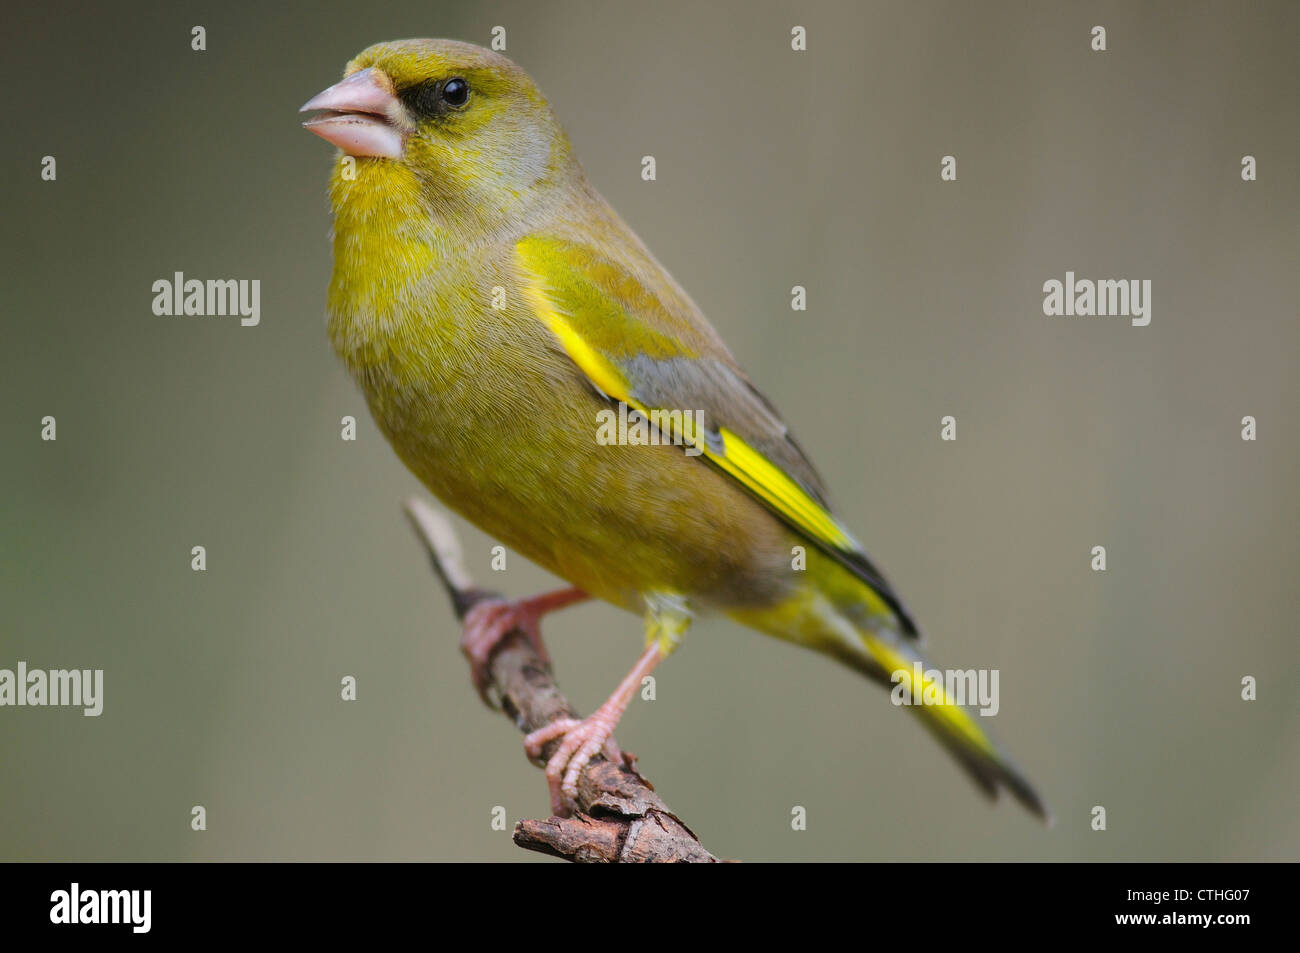 A greenfinch perched an a twig UK Stock Photo